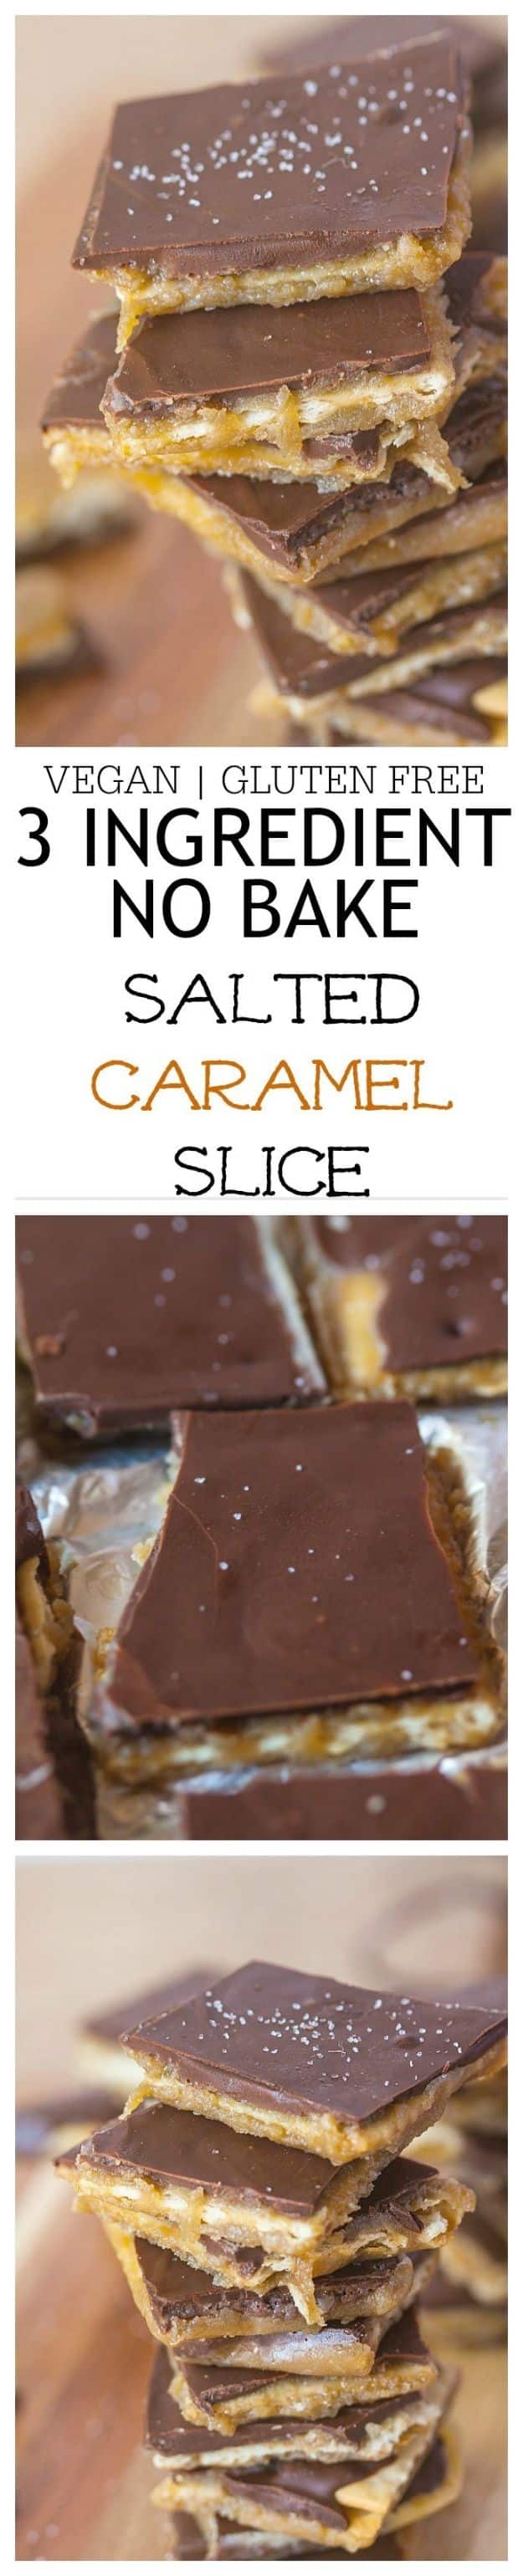 Gluten Free Desserts - Healthy No Bake Salted Caramel Slice - Easy Recipes and Healthy Recipe Ideas for Cookies, Cake, Pie, Cupcakes, Cheesecake and Ice Cream - Best No Sugar Glutenfree Chocolate, No Bake Dessert, Fruit, Peach, Apple and Banana Dishes - Flourless Christmas, Thanksgiving and Holiday Dishes #glutenfree #desserts #recipes